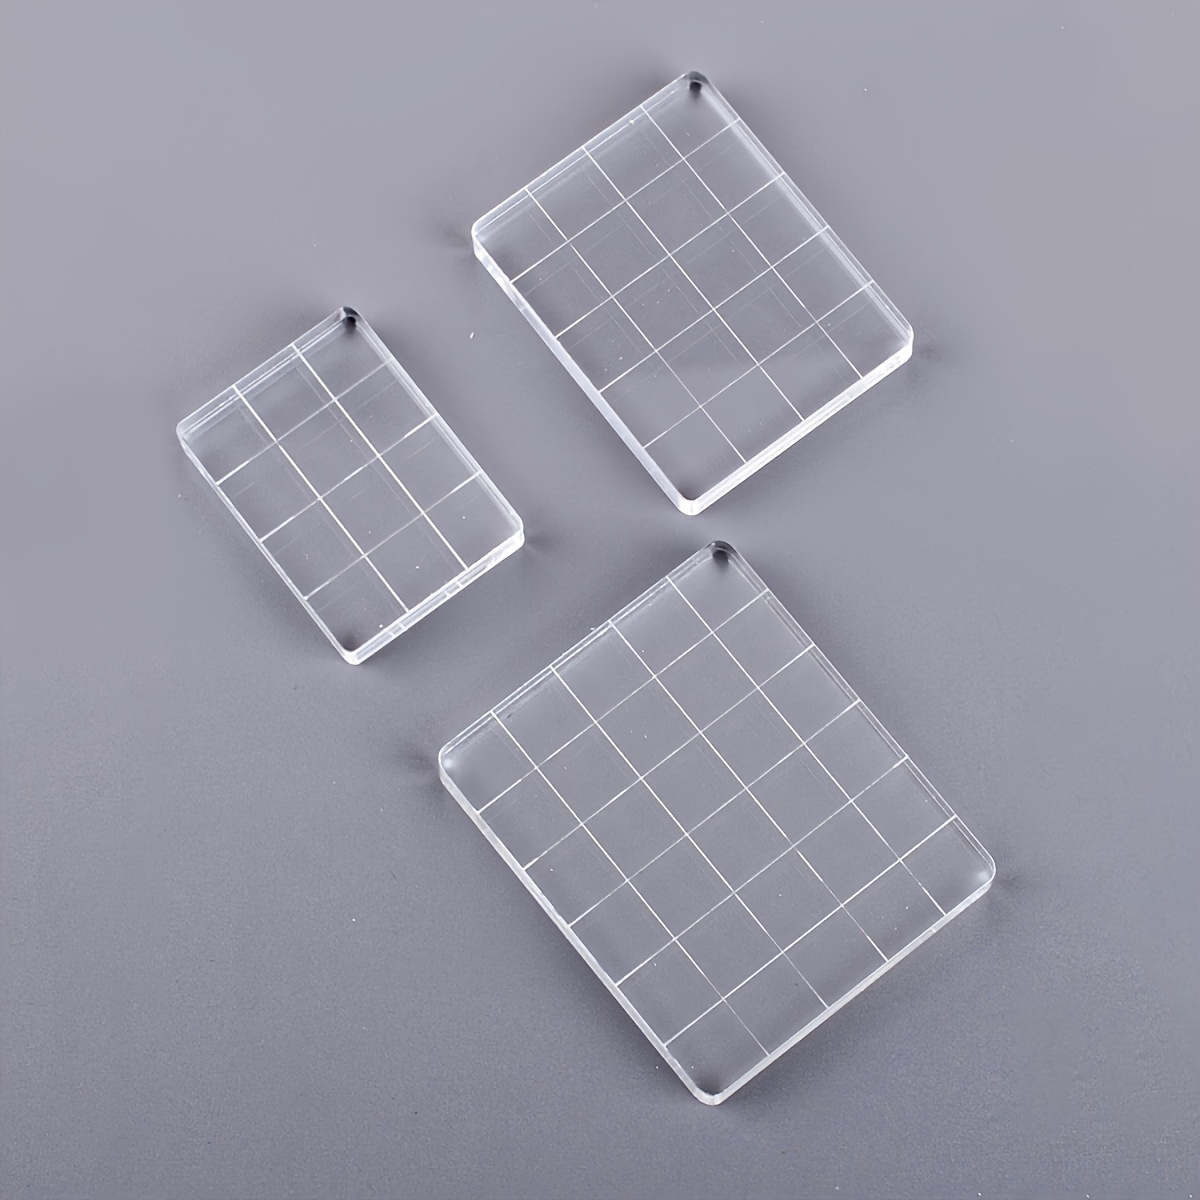 3-9pcs/set Clear Acrylic Stamp Block Kit With Grid Lines for Diy  Transparent Silicone Stamp/Seal Easy To Make Scrapbooking Craft